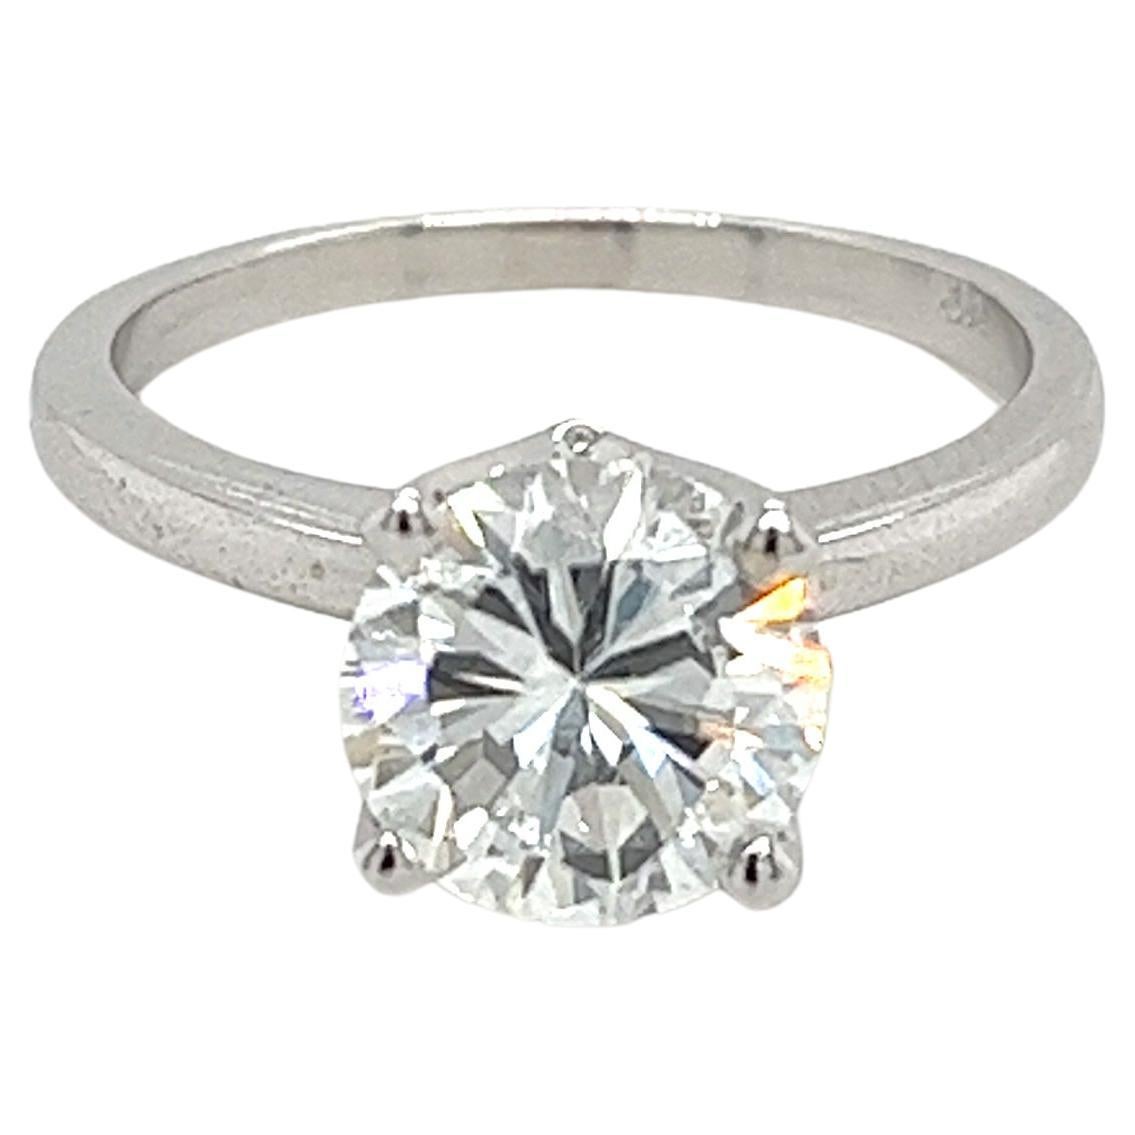 GIA Certified 2.02 Carat D color VVS2 Clarity Diamond Solitaire White Gold Ring